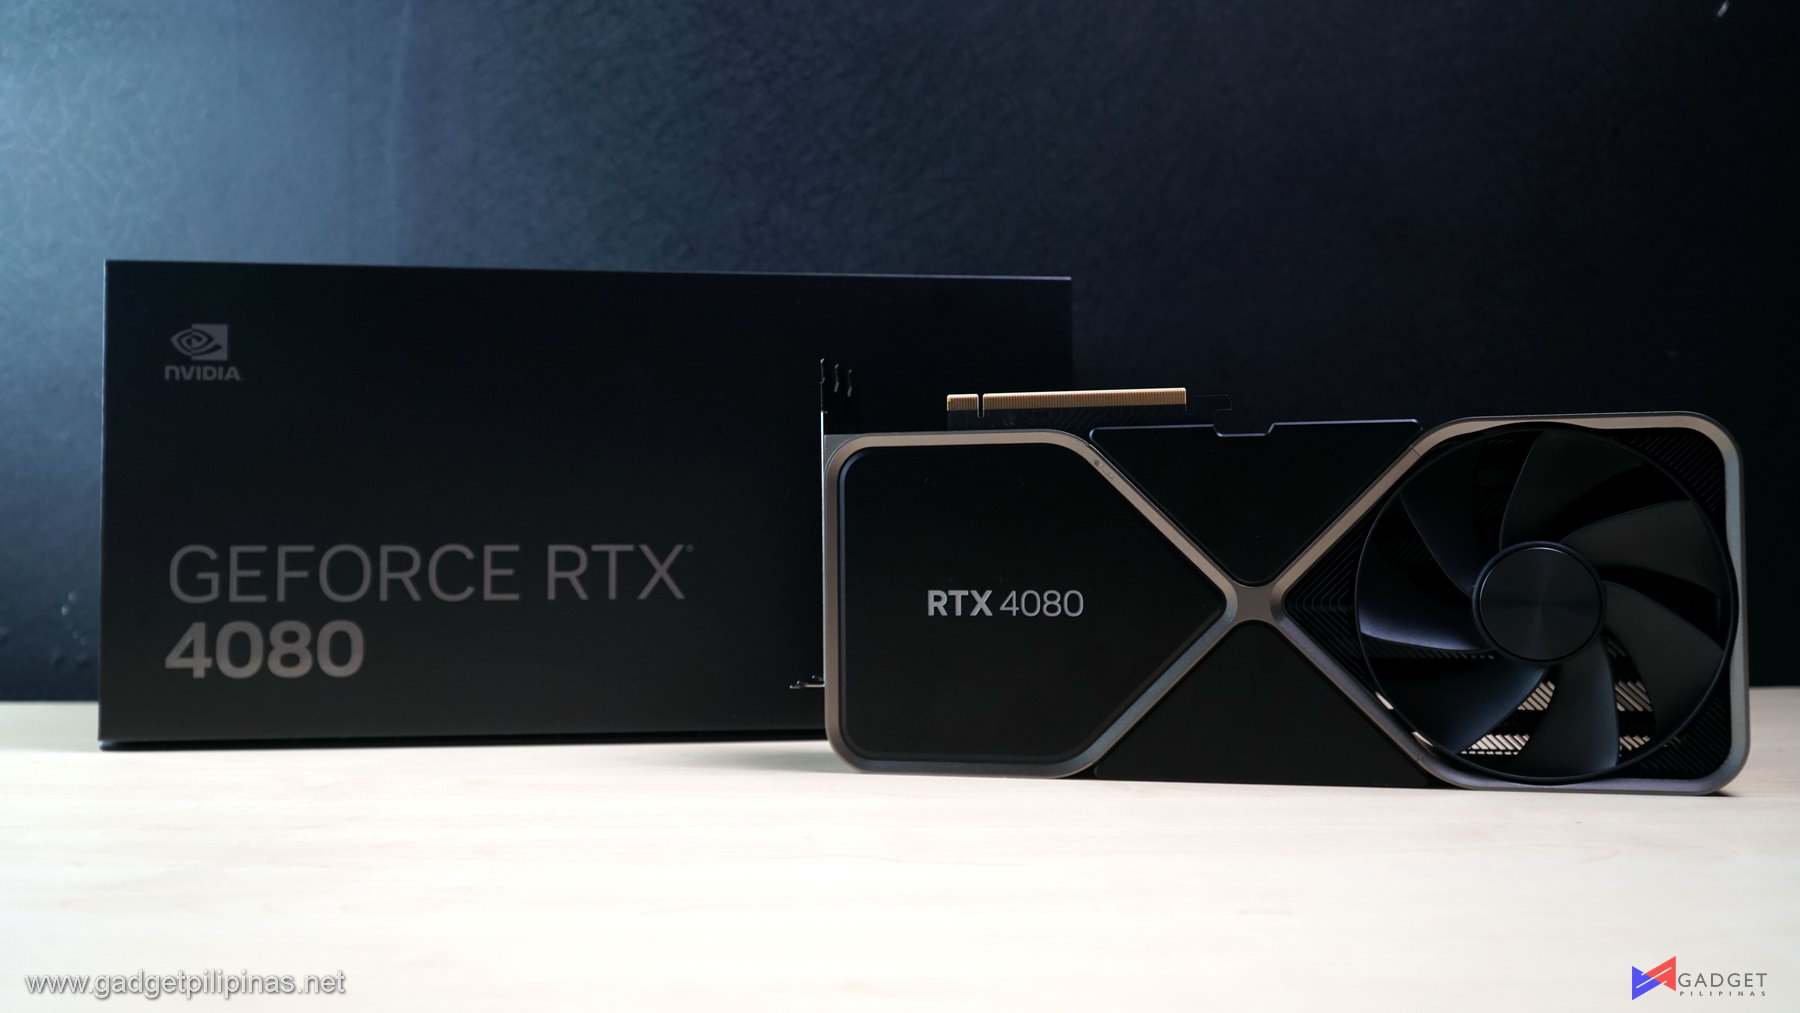 Nvidia GeForce RTX 4080 Founders Edition Review – The More Practical Upgrade